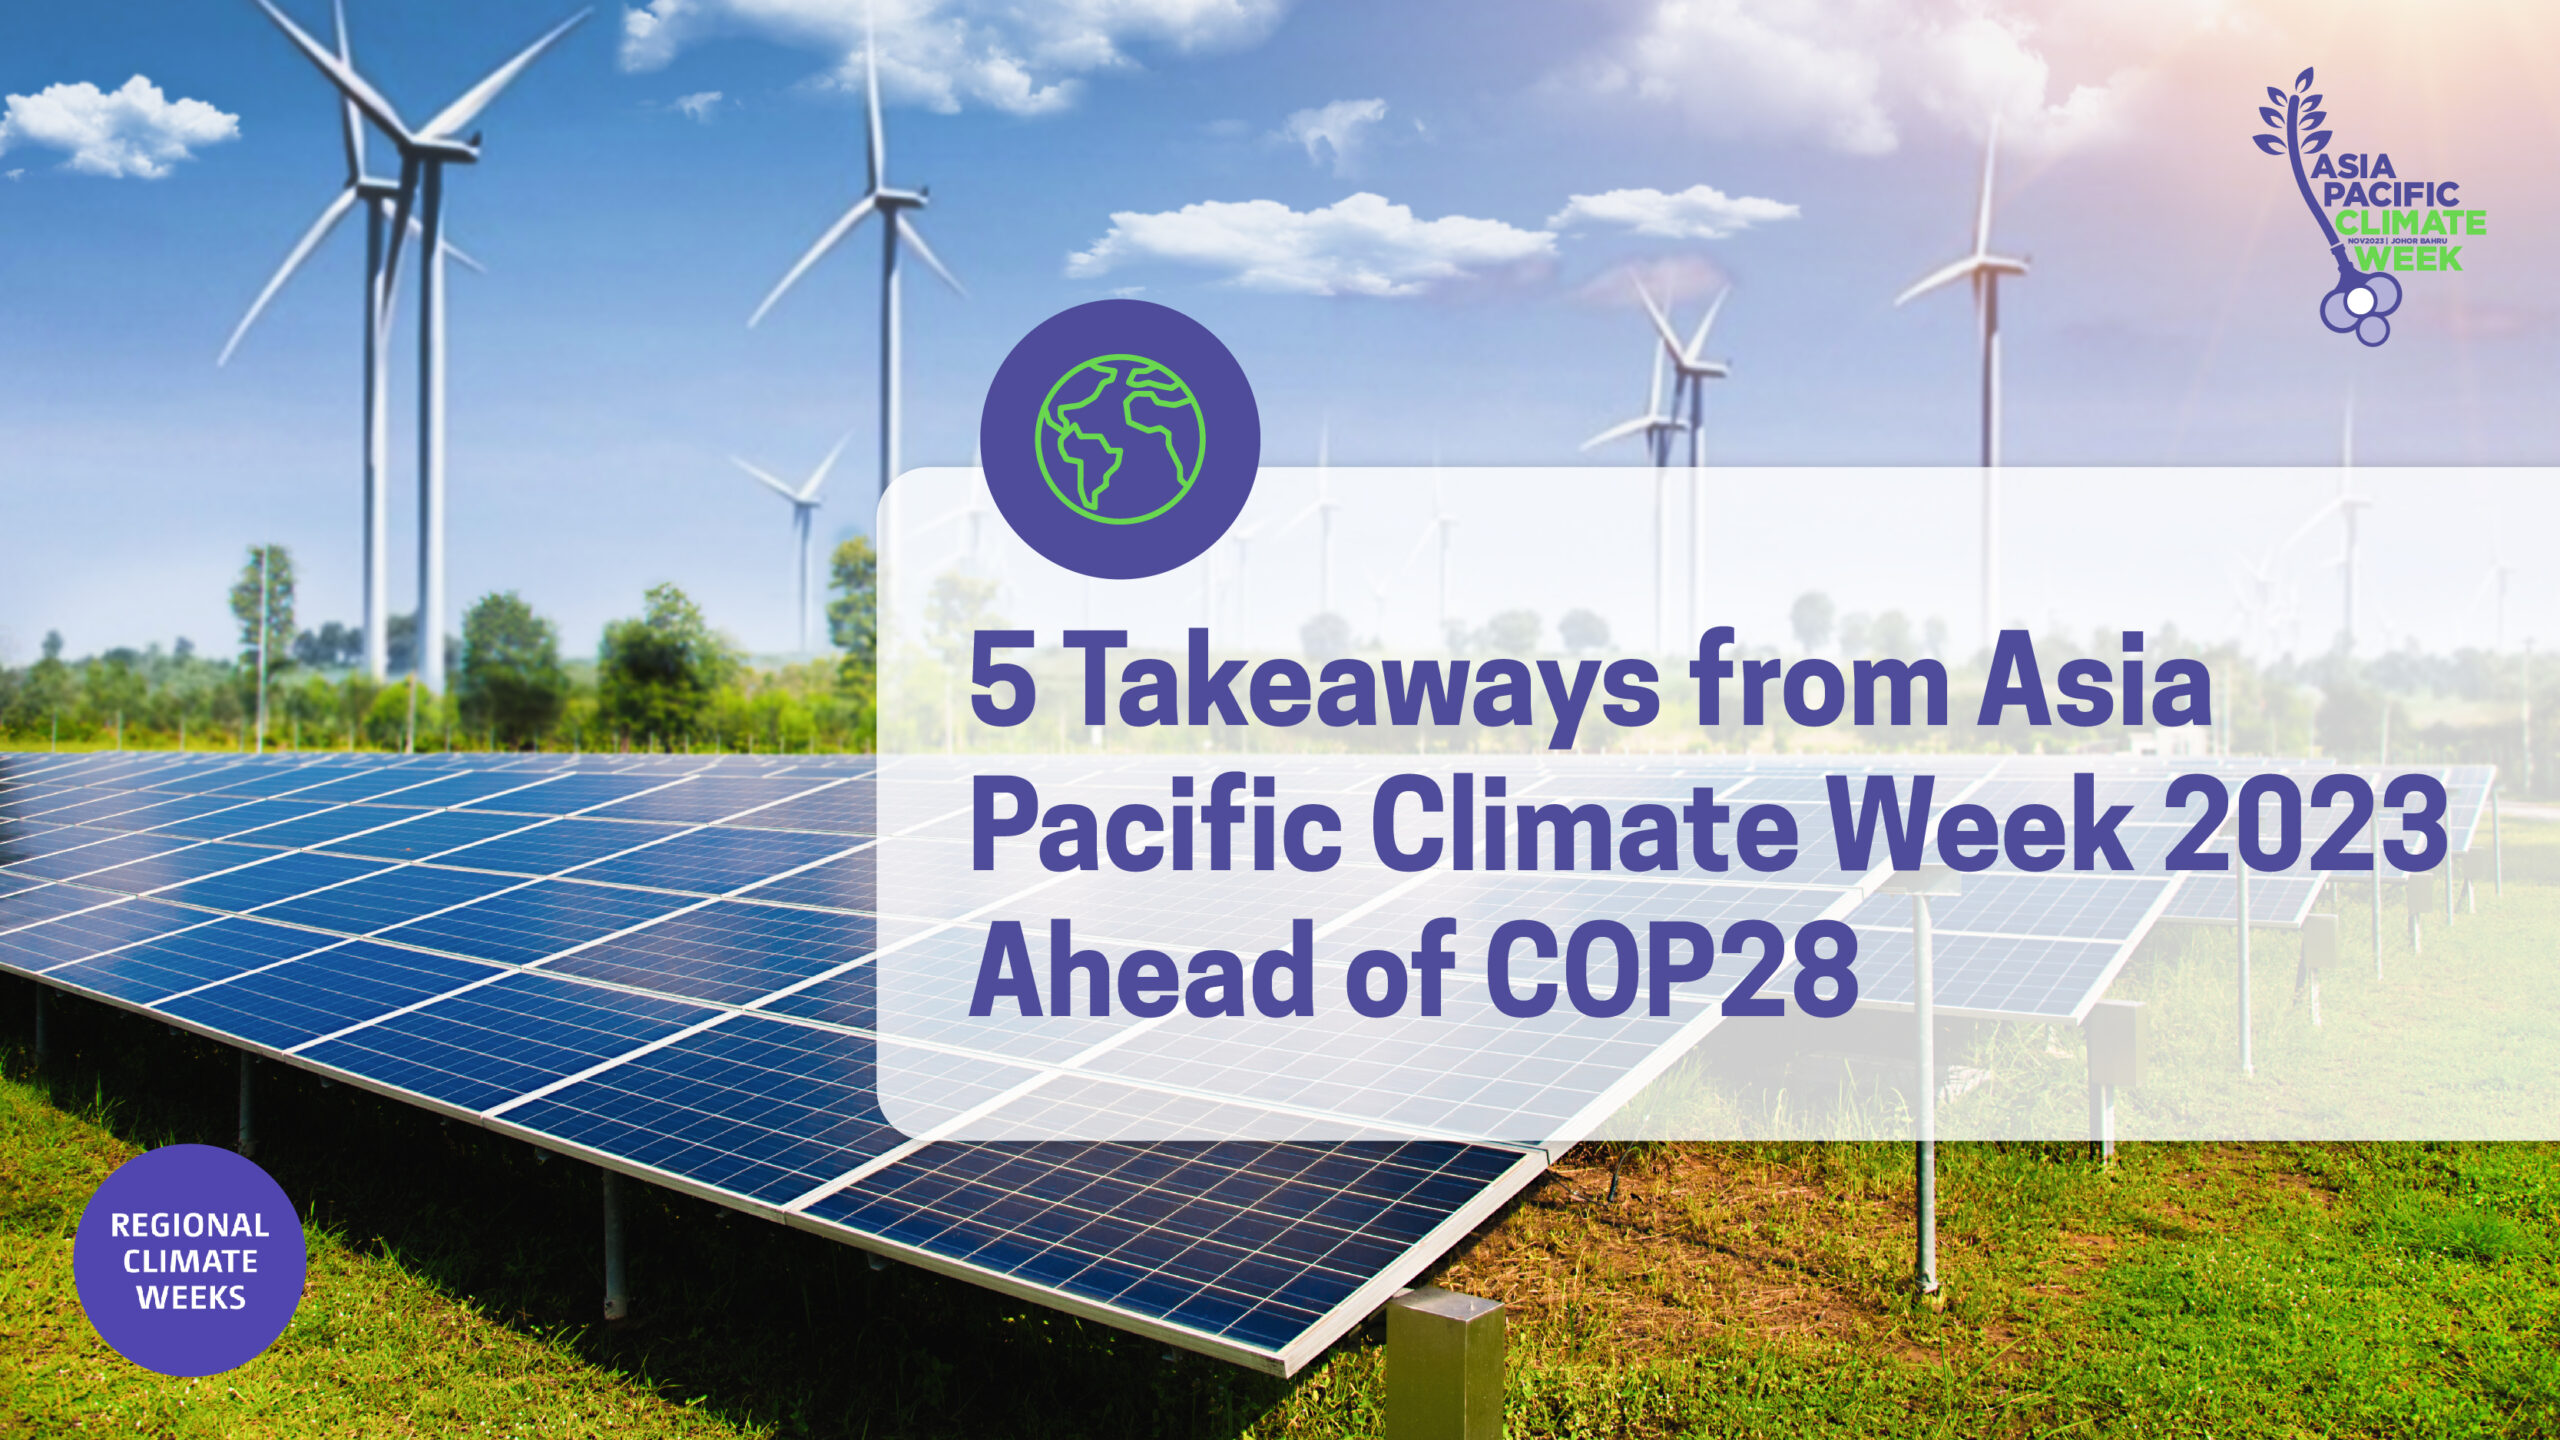 Explore the top 5 takeaways from APCW2023 and what they mean for Asia Pacific’s climate future.